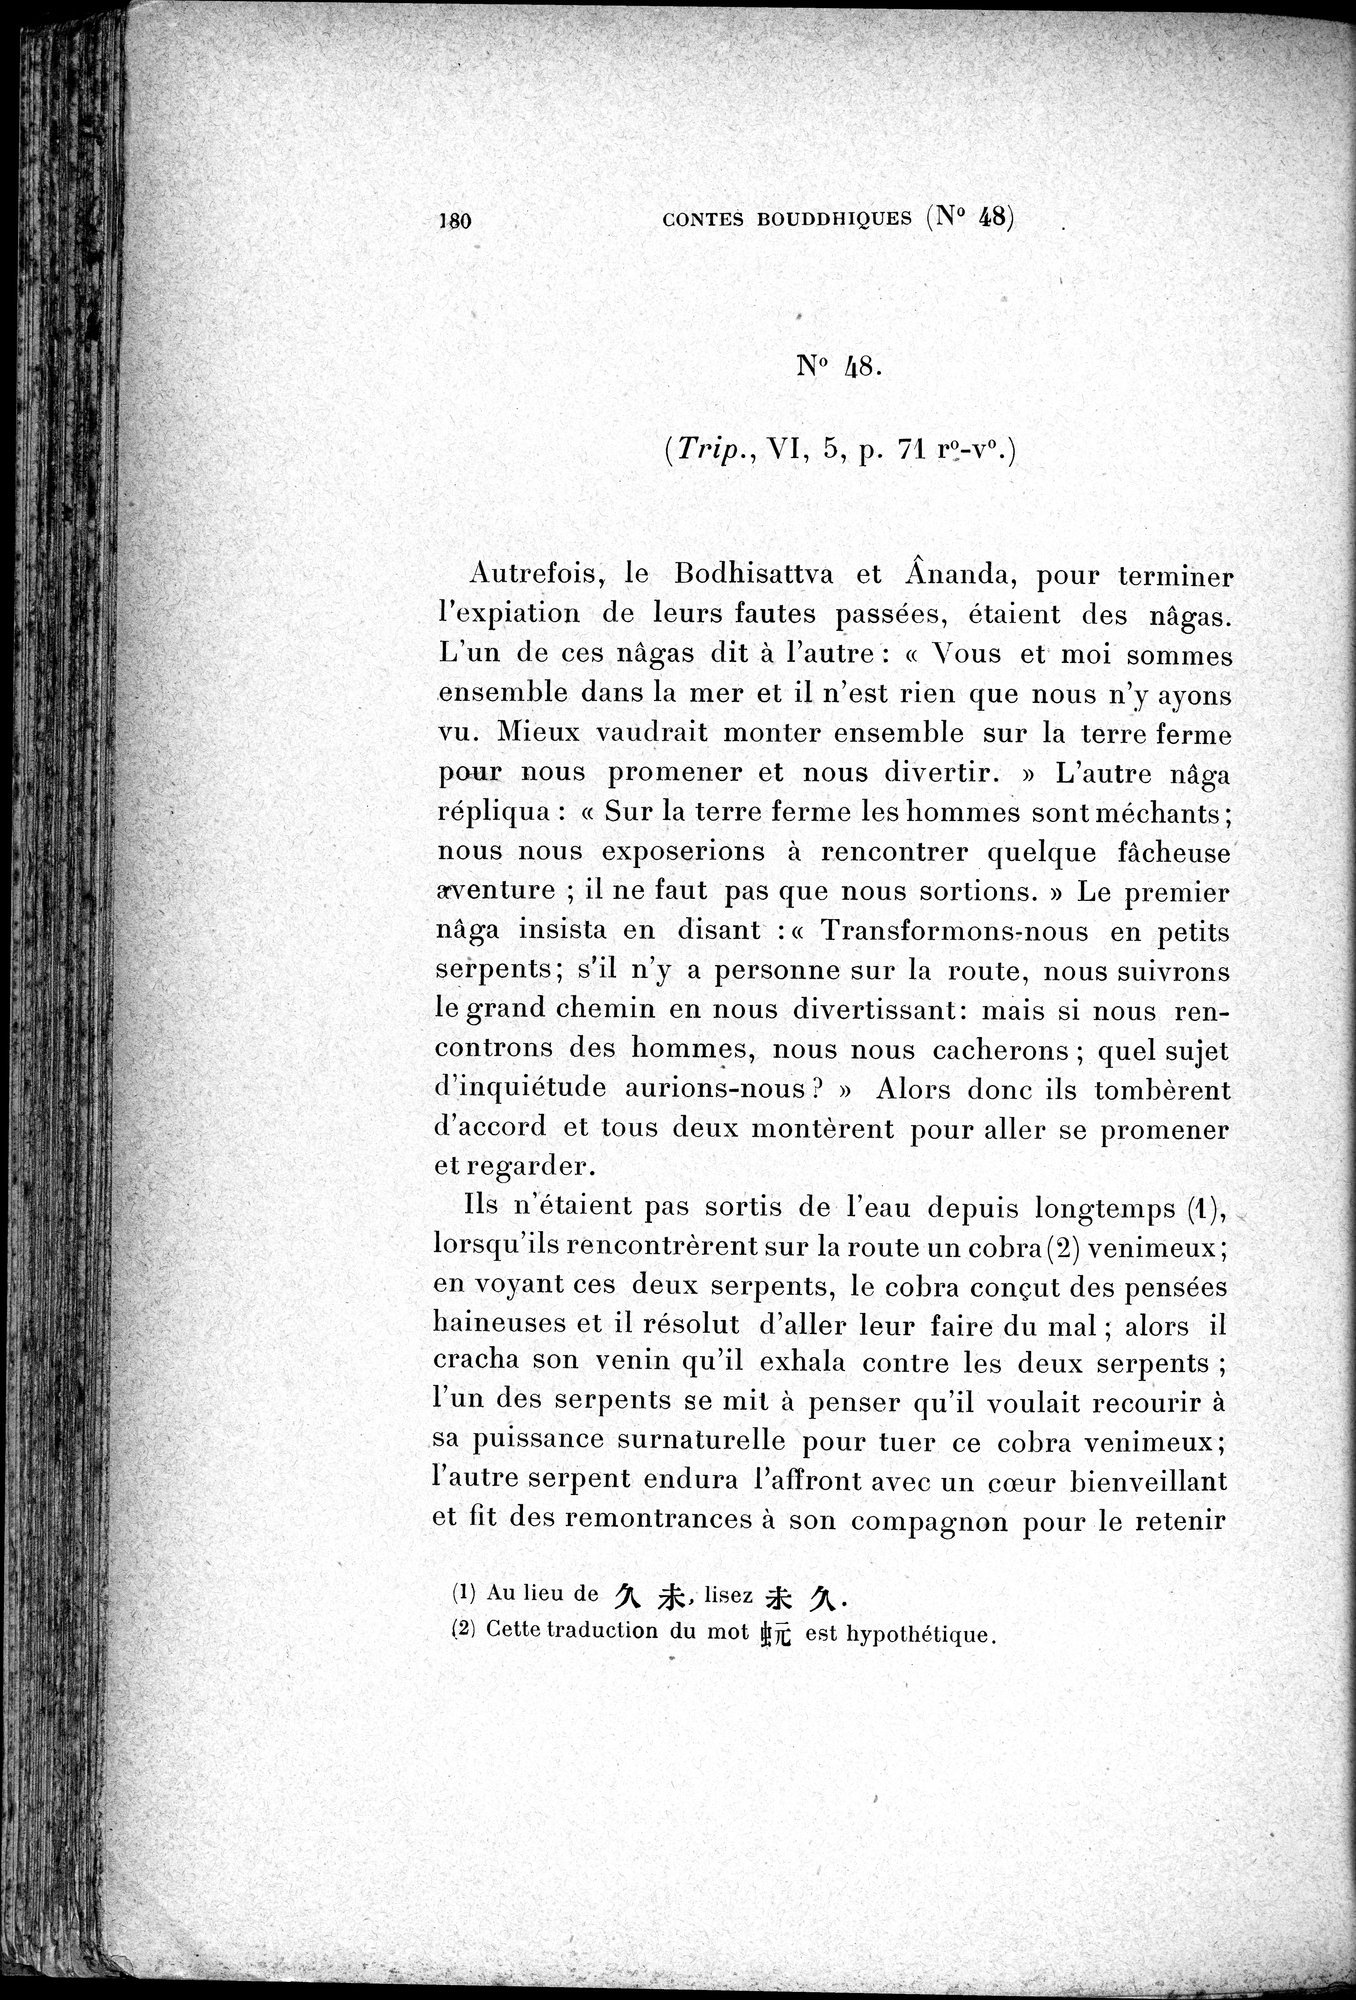 Cinq Cents Contes et Apologues : vol.1 / Page 214 (Grayscale High Resolution Image)